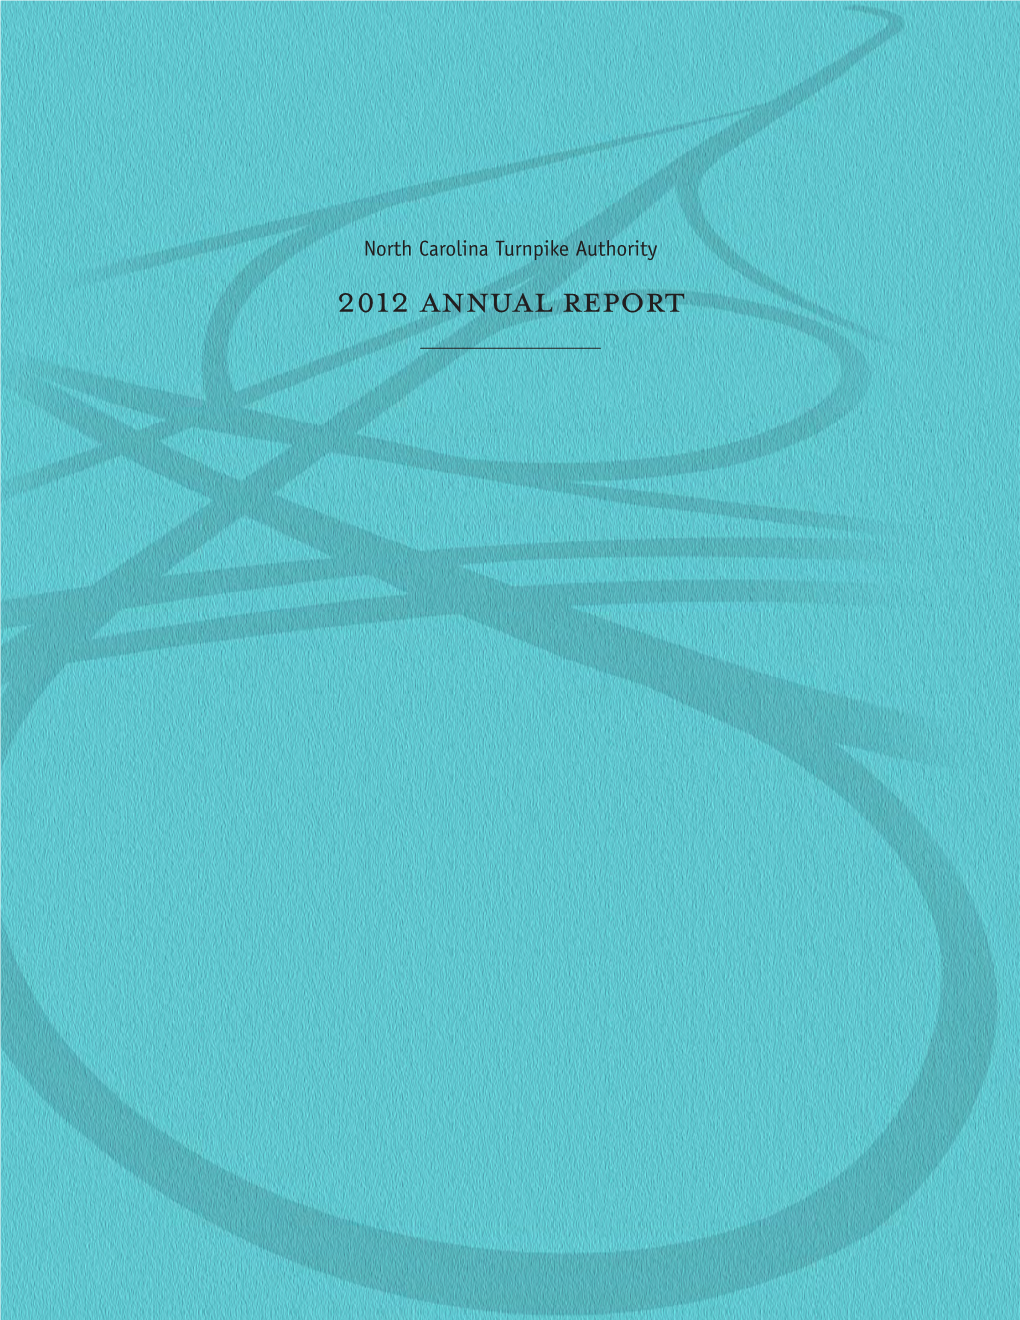 2012 Annual Report Phase III of the Triangle Expressway Opened in December 2012